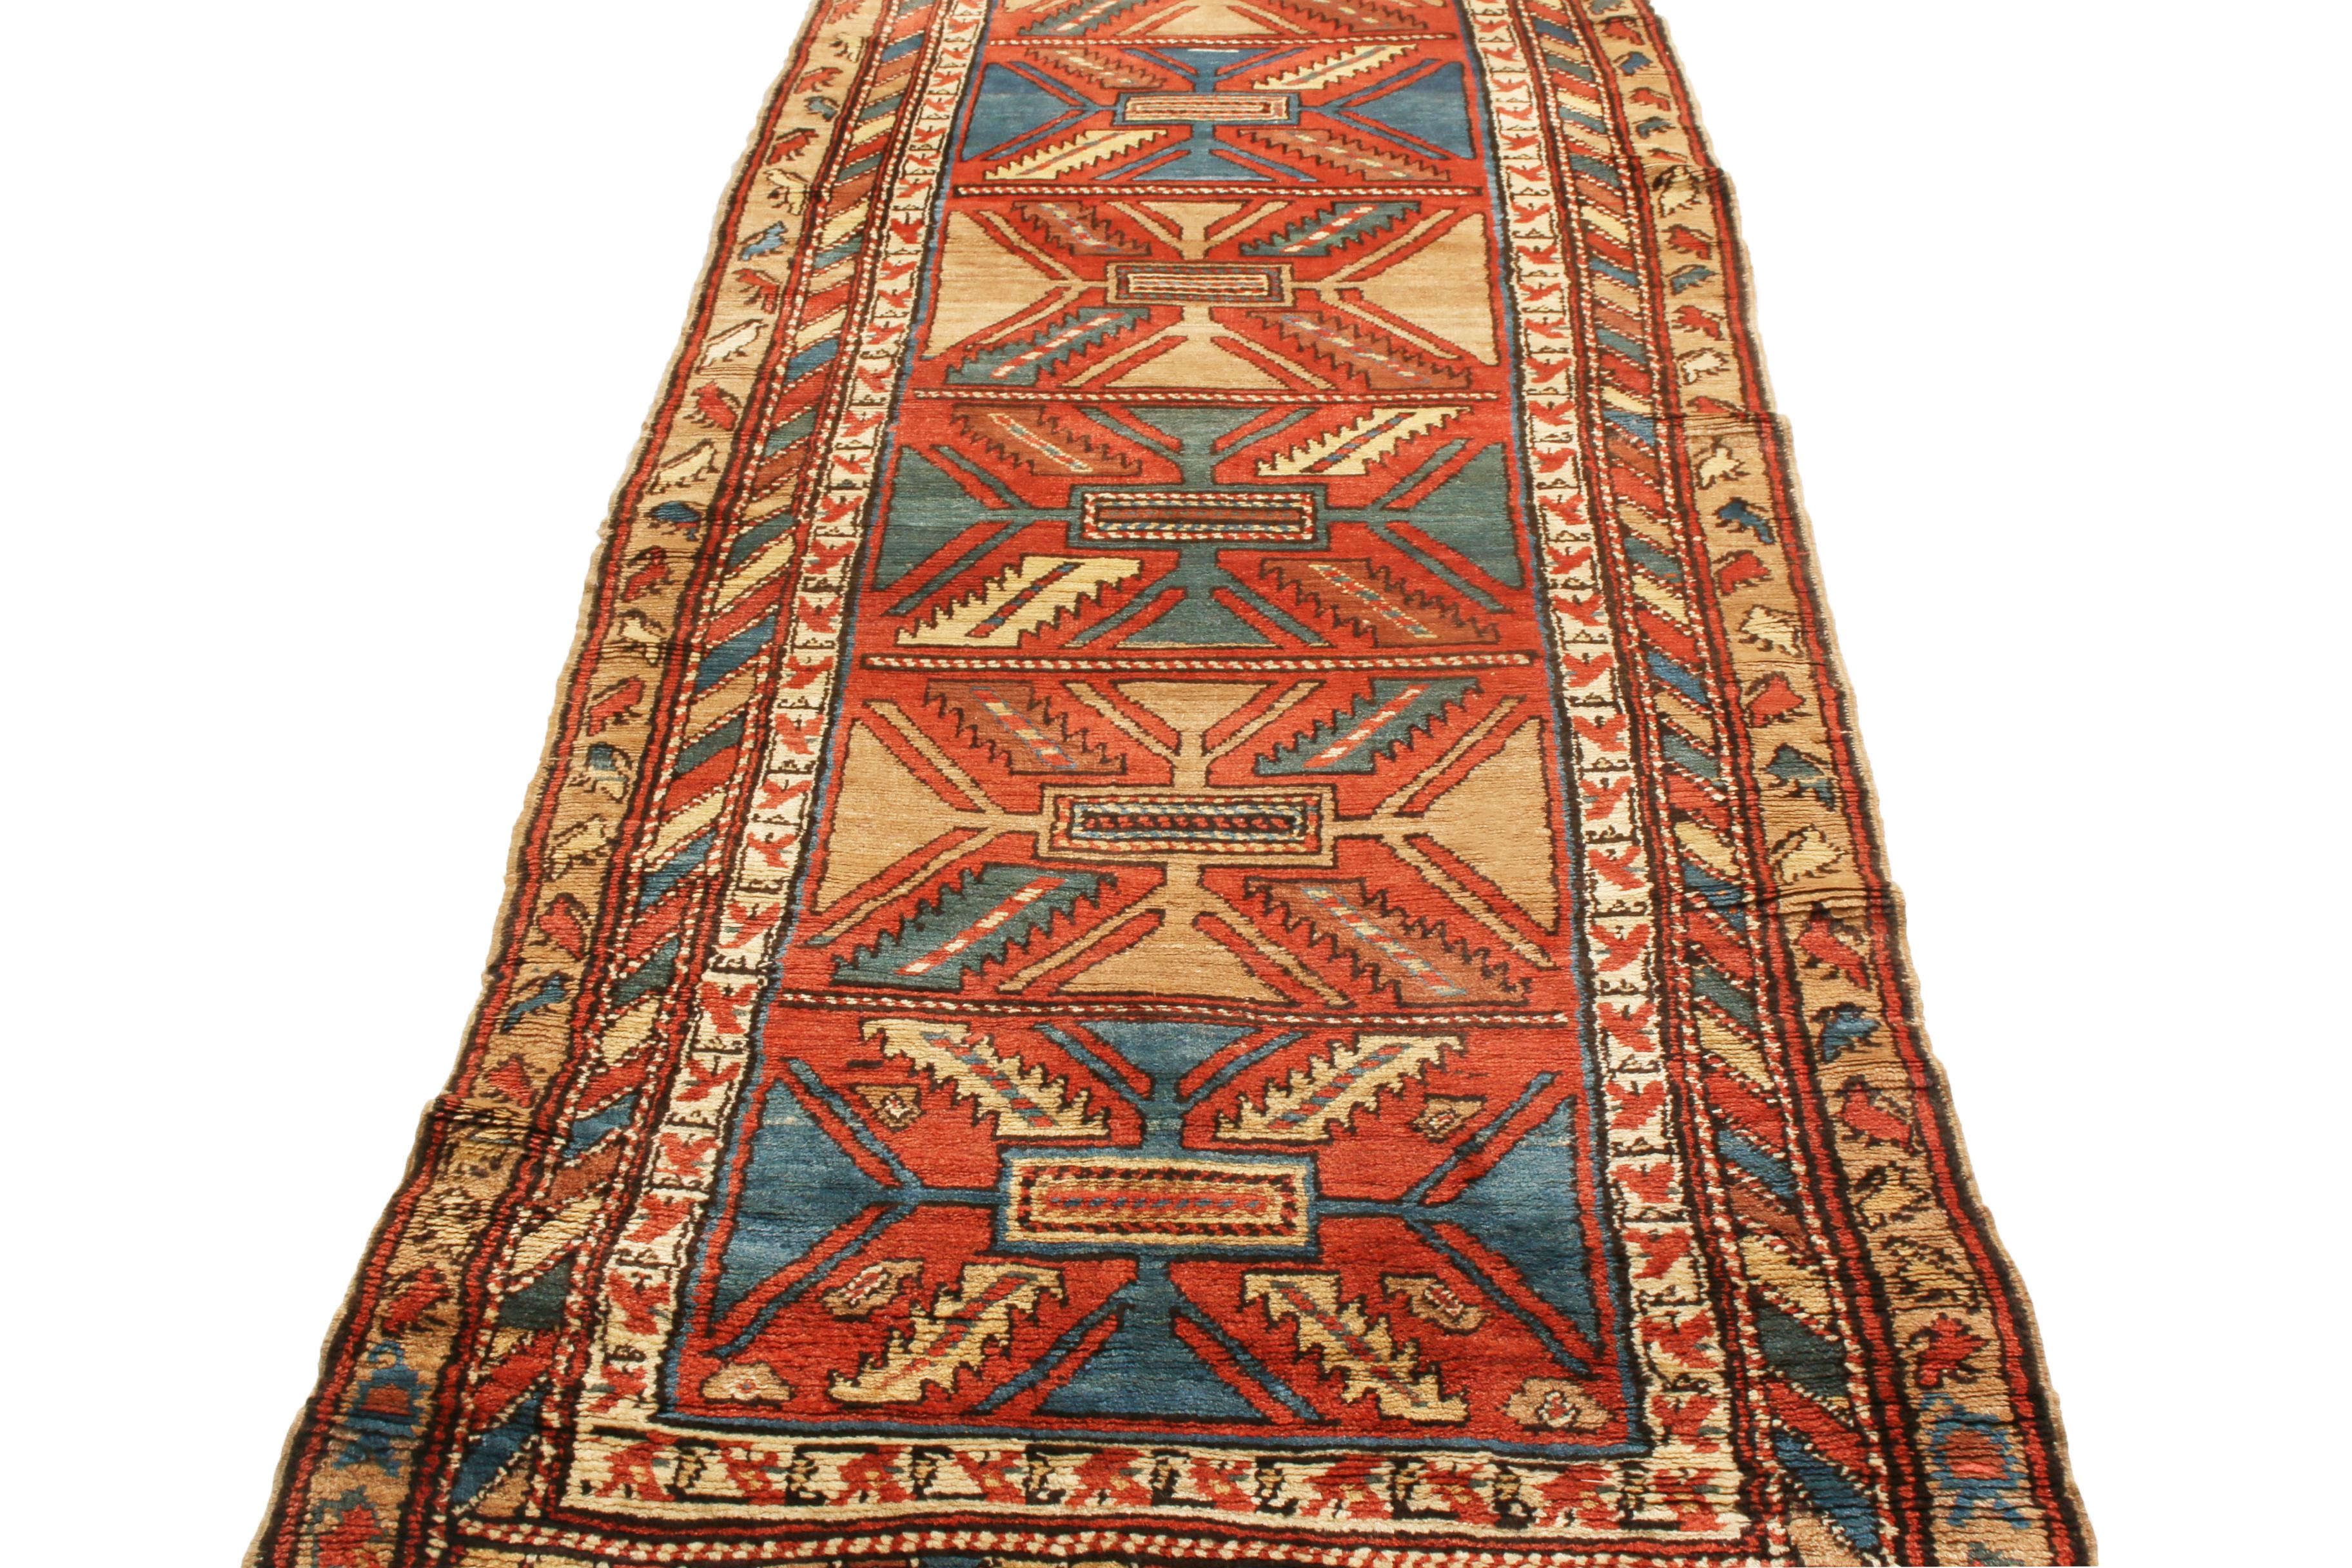 Originating from Persia in 1910, this antique Bakhshaish Persian runner features an uncommon Minimalist approach to vibrant colourways in its geometric field design. Hand knotted in durable, Fine wool, the guard border depicts a repetition of